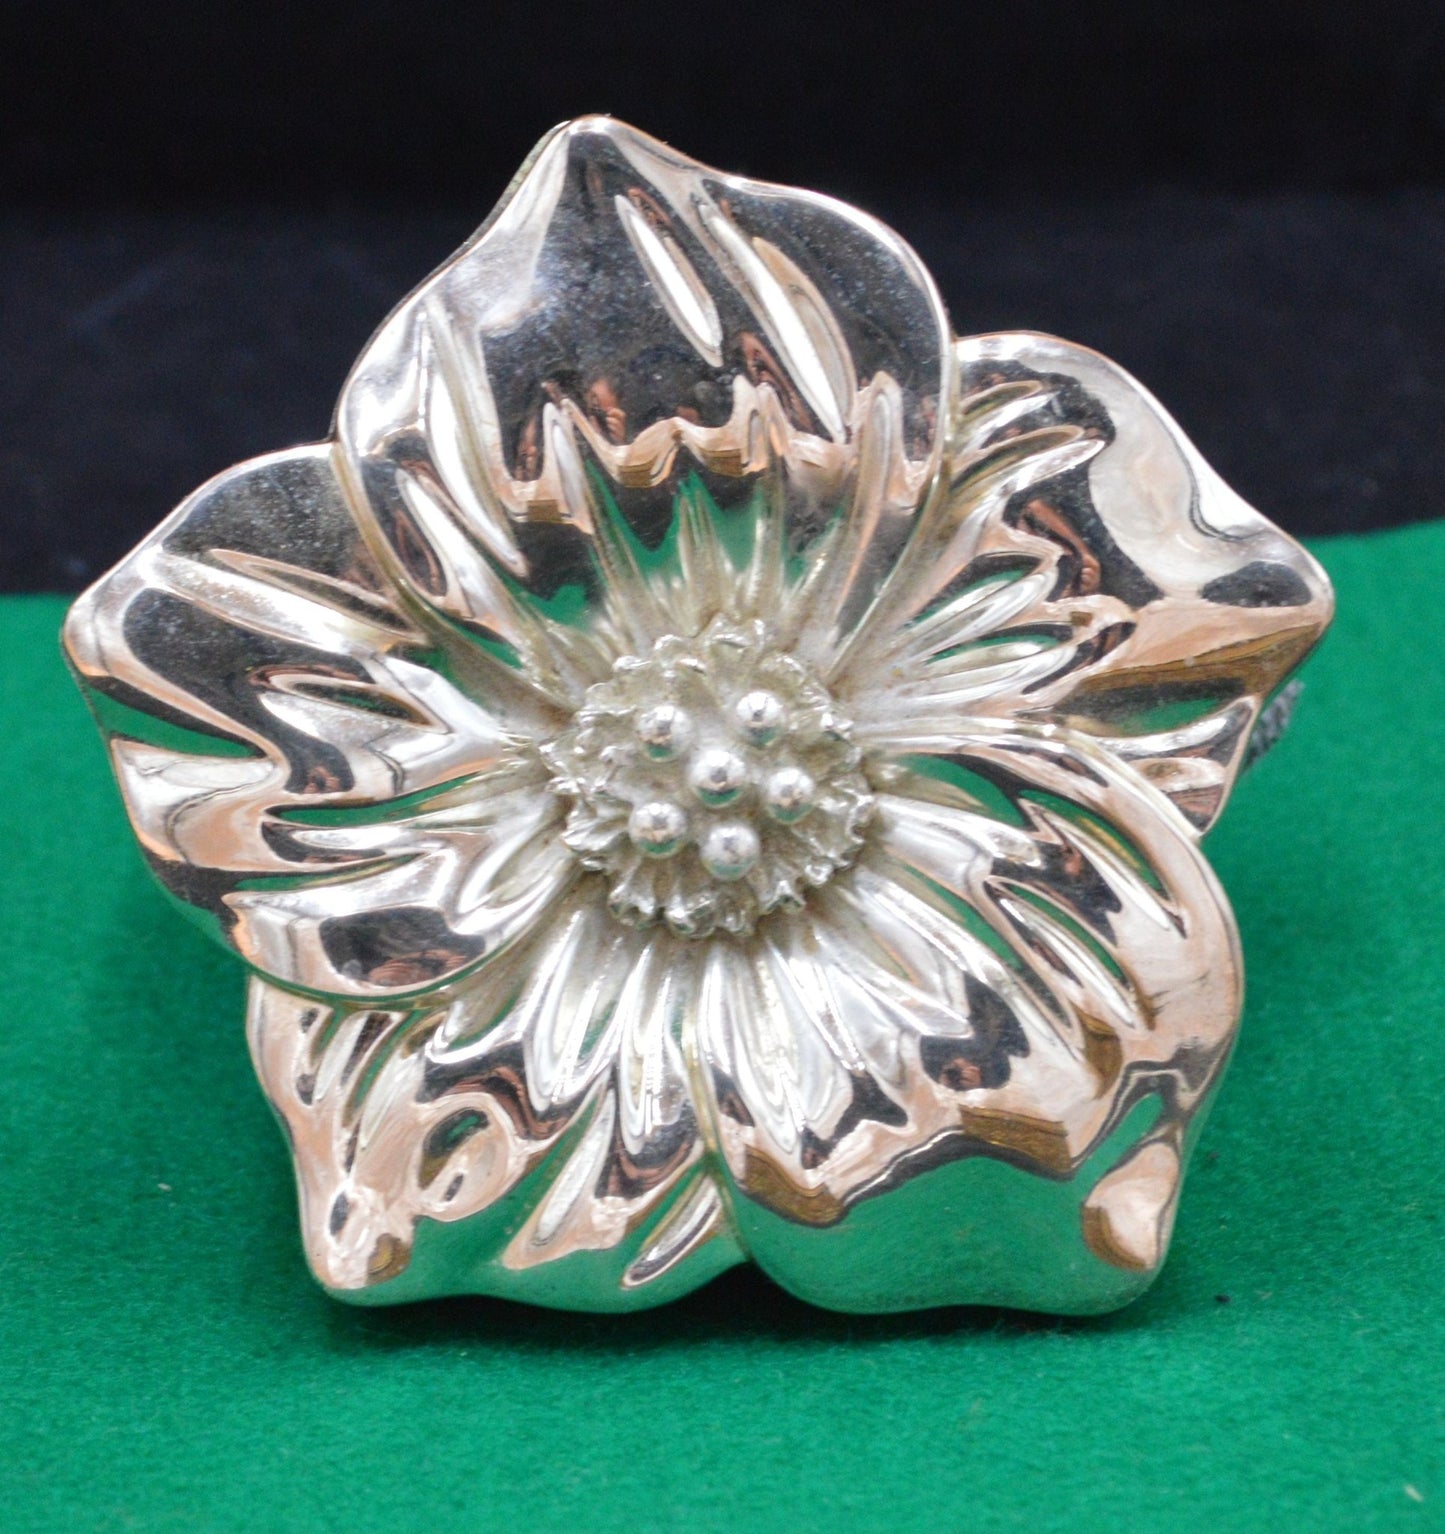 MIRRORED SILVER TONE METAL FLOWER TRINKET BOX by FOR YOUR EASE ONLY(PREVIOUSLY OWNED) VERY GOOD CONDITION - TMD167207